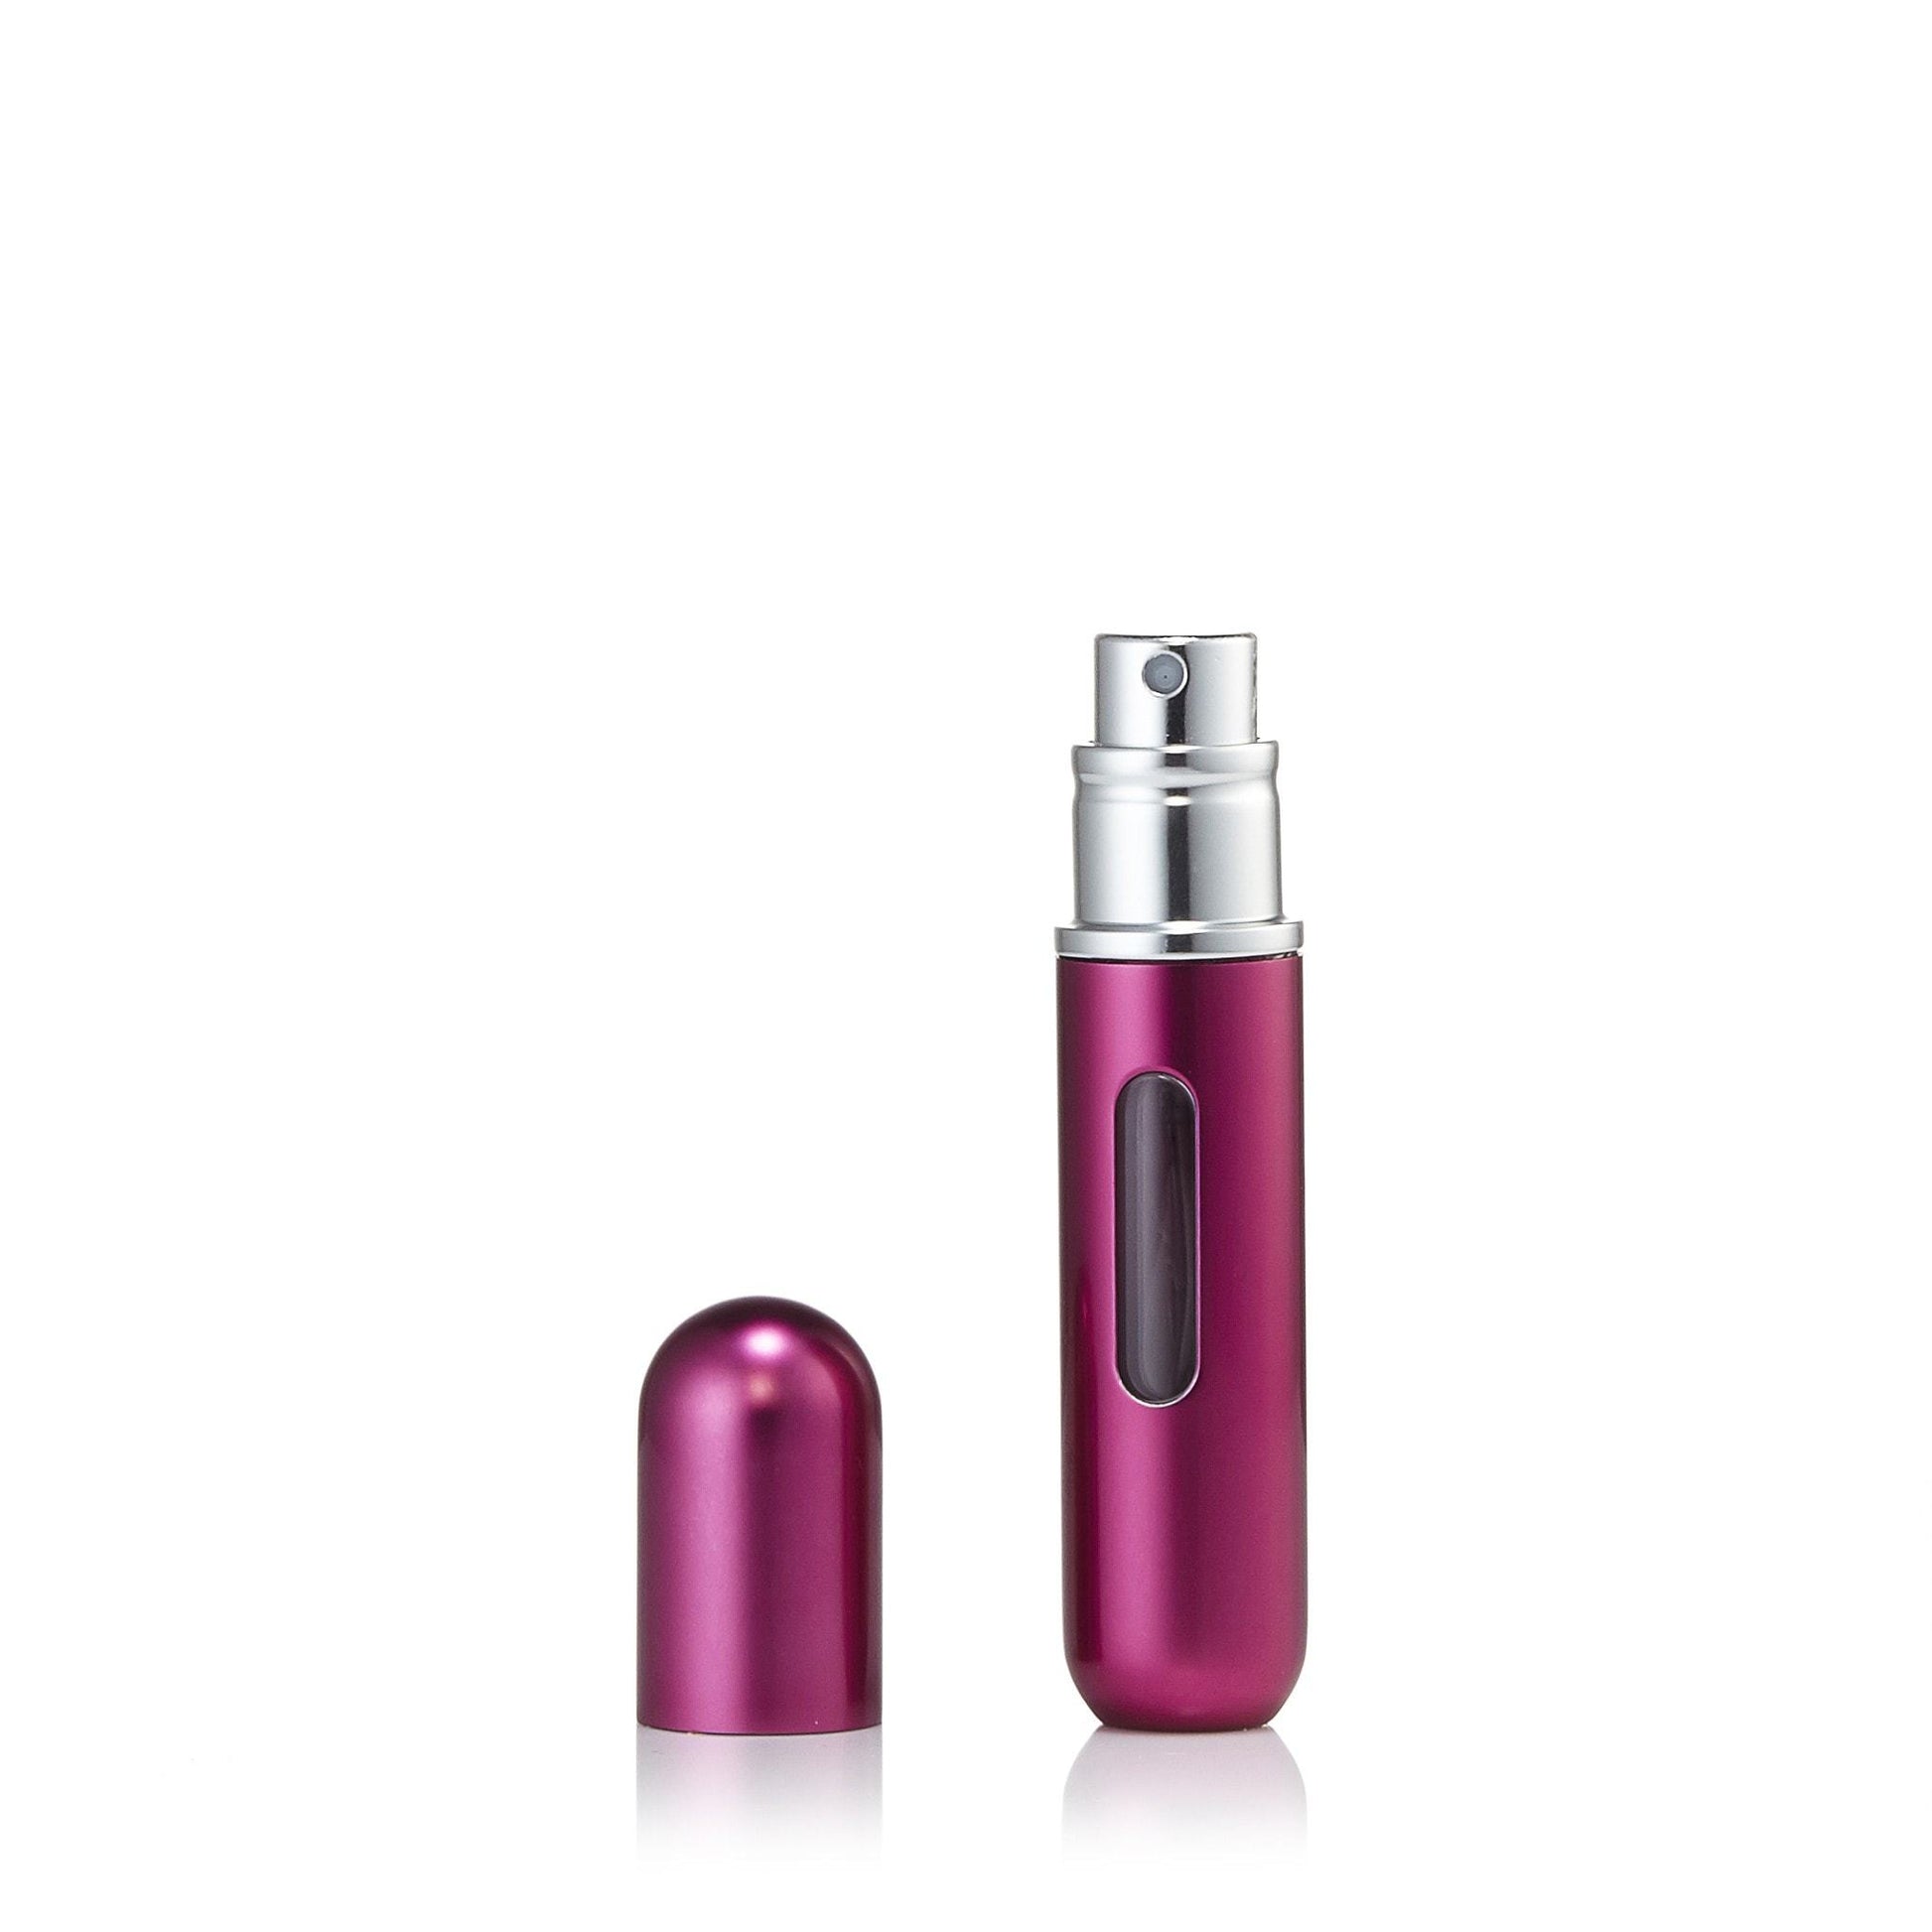 Pump and Fill Fragrance Atomizer by Flo, Product image 1